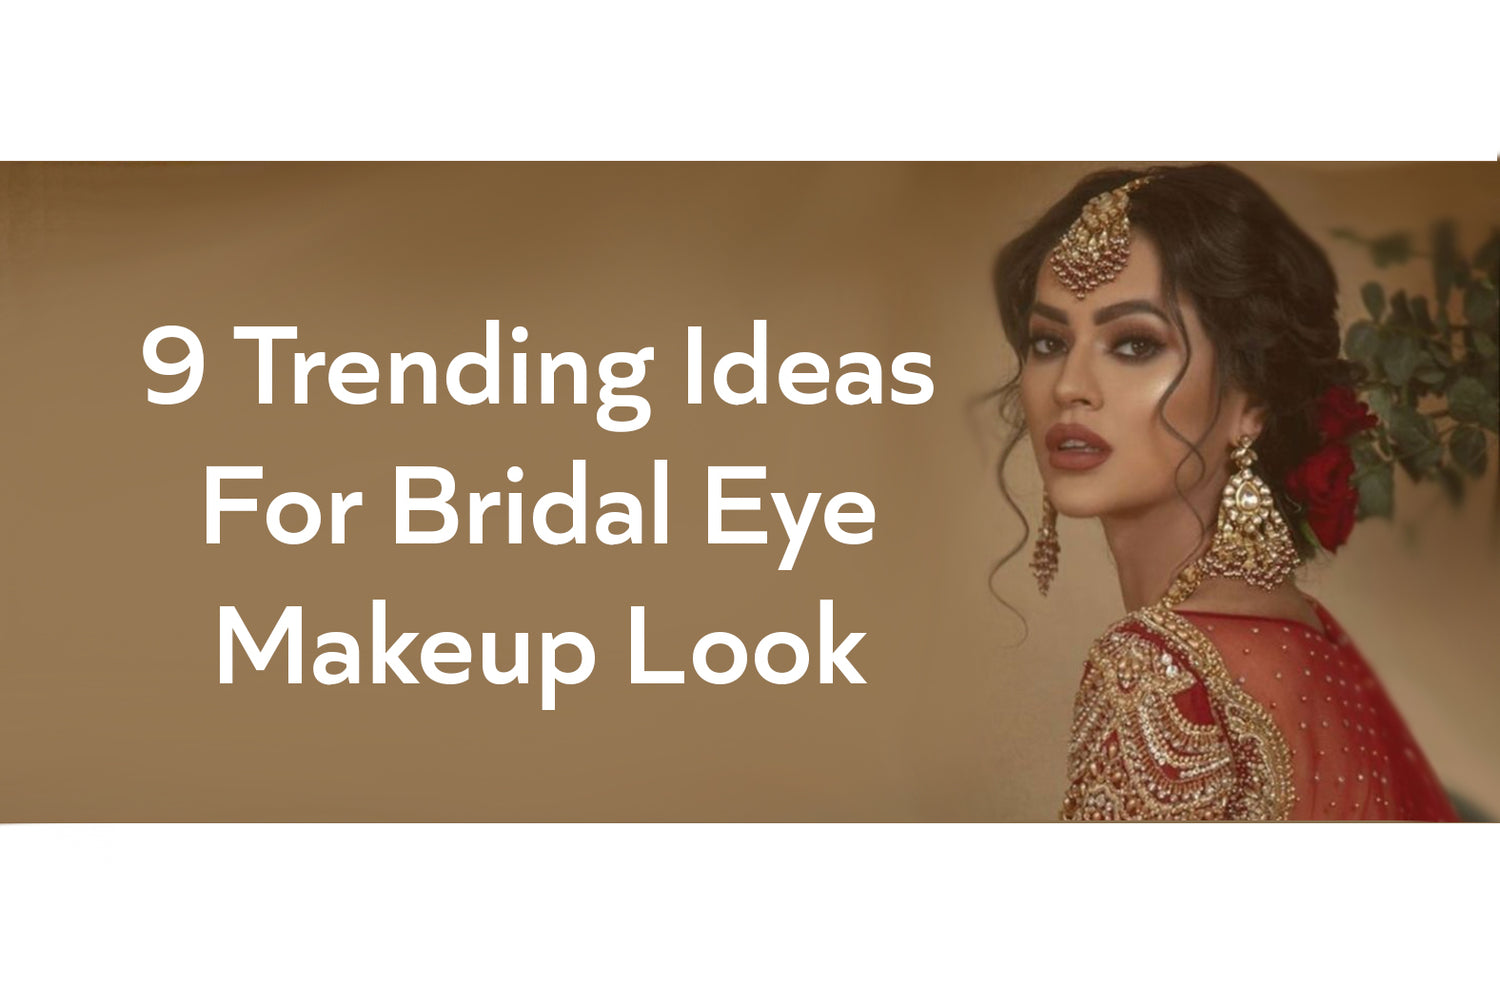 9 Trending Ideas For Bridal Eye Makeup Look - Which Will You Choose